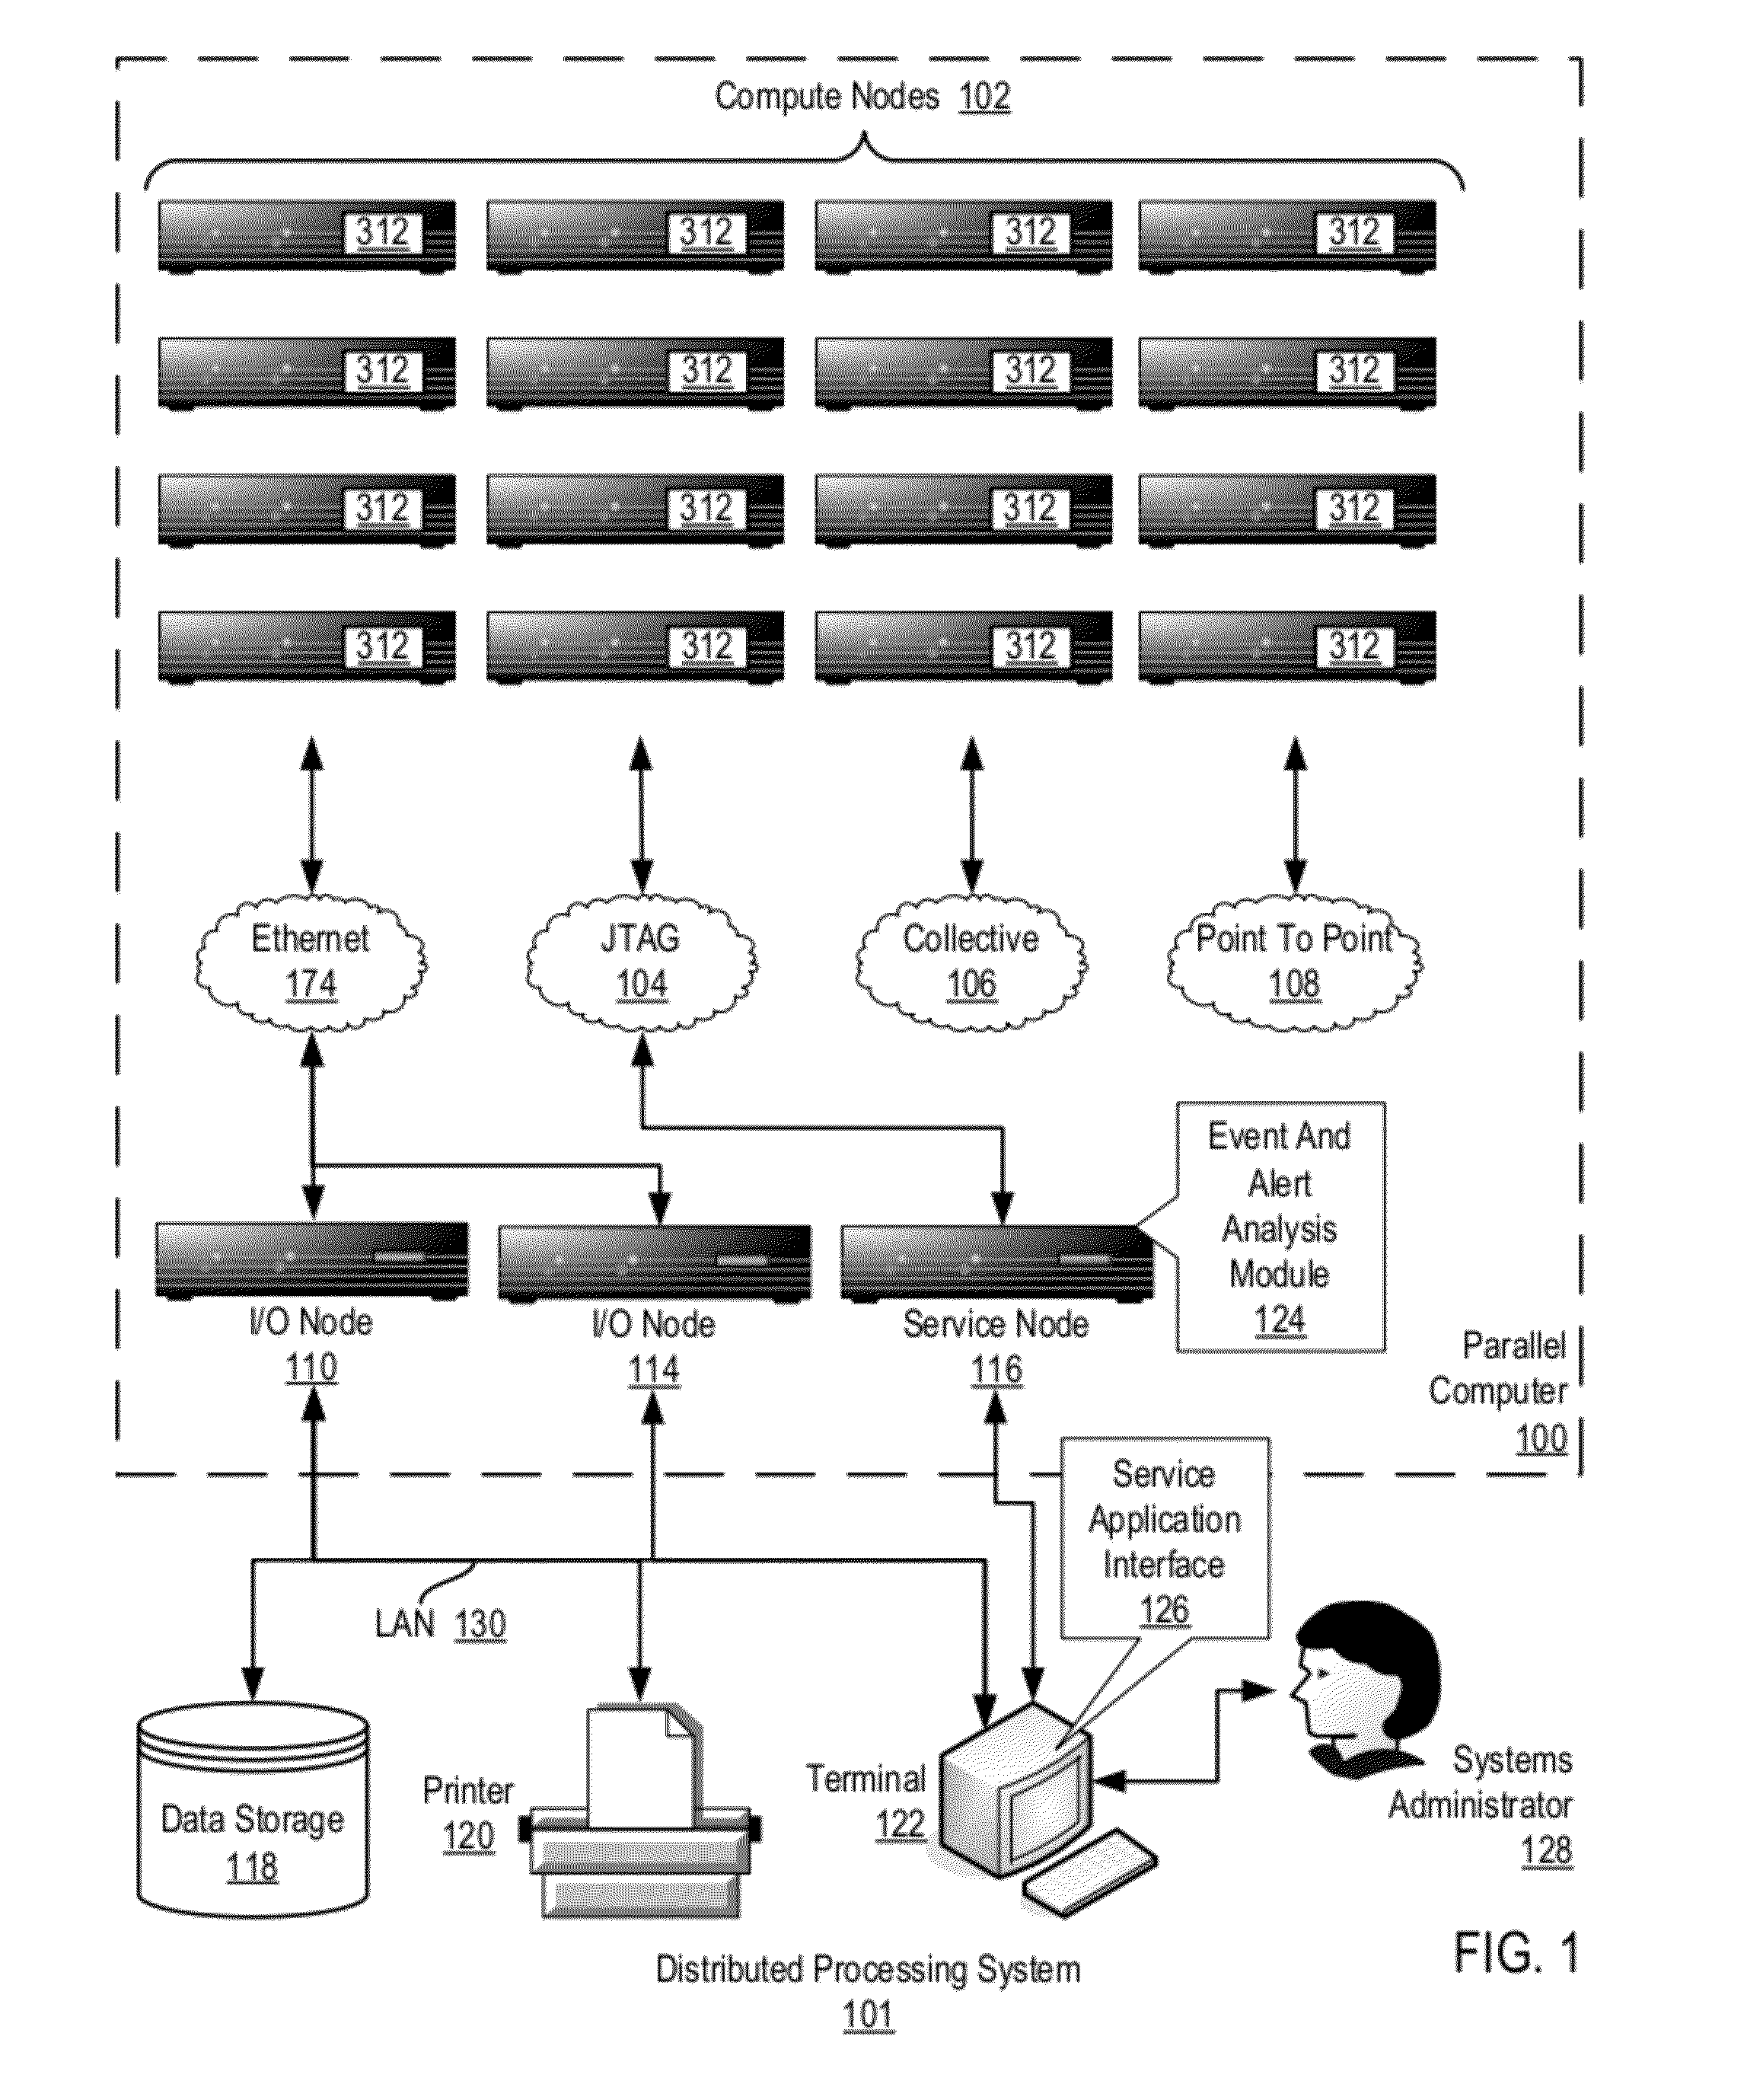 Event Management In A Distributed Processing System